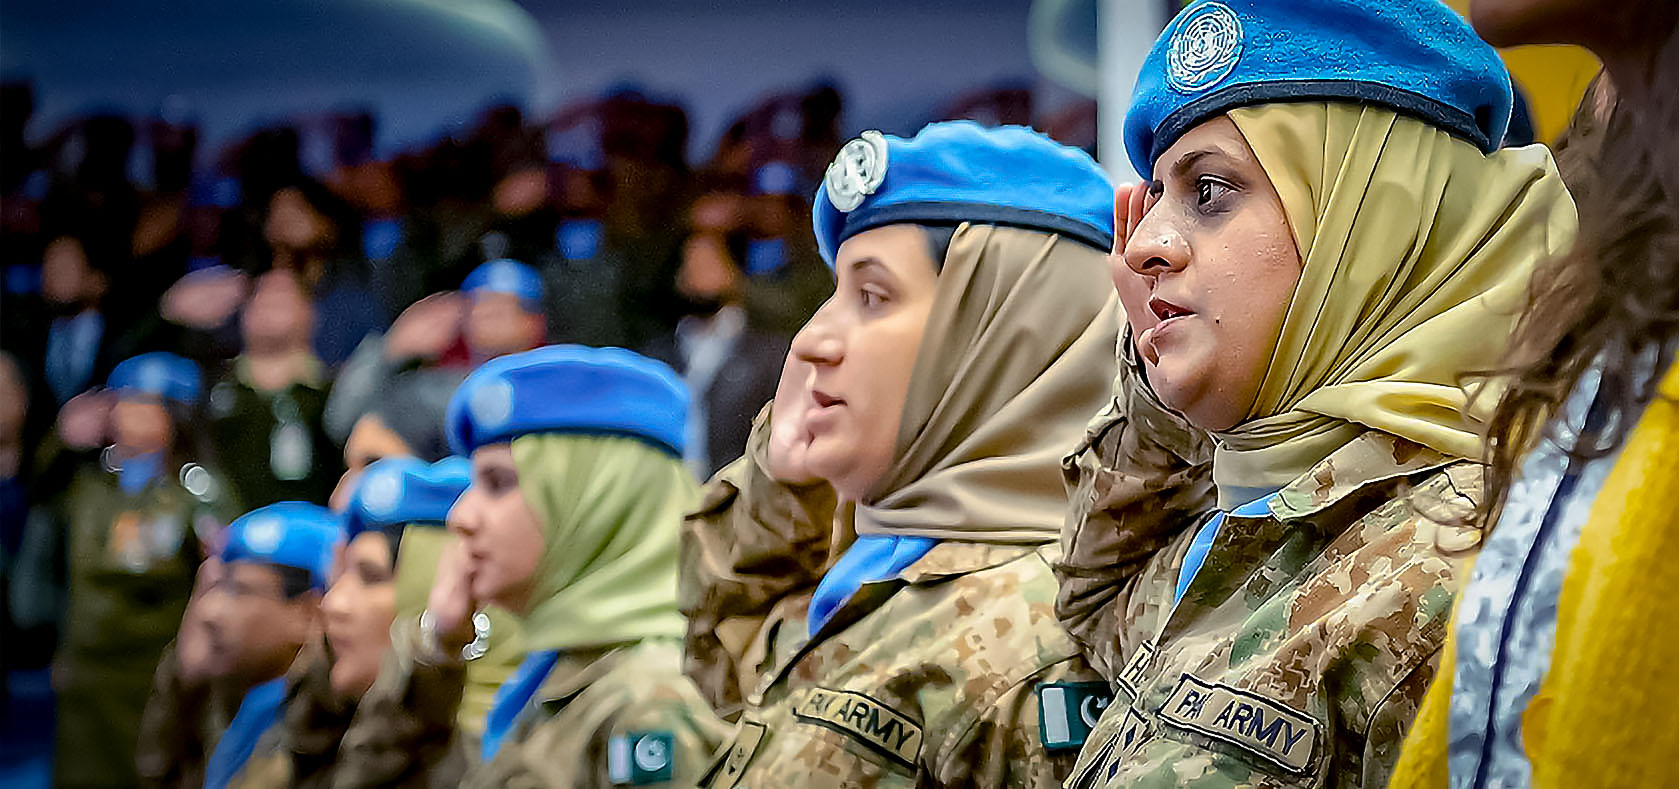 Pakistani women peacekeepers in the audience at the National University of Science and Technology in Islamabad, where Secretary-General António Guterres delivered an address on the topic of peacekeeping. Photo: UN Photo/Mark Garten